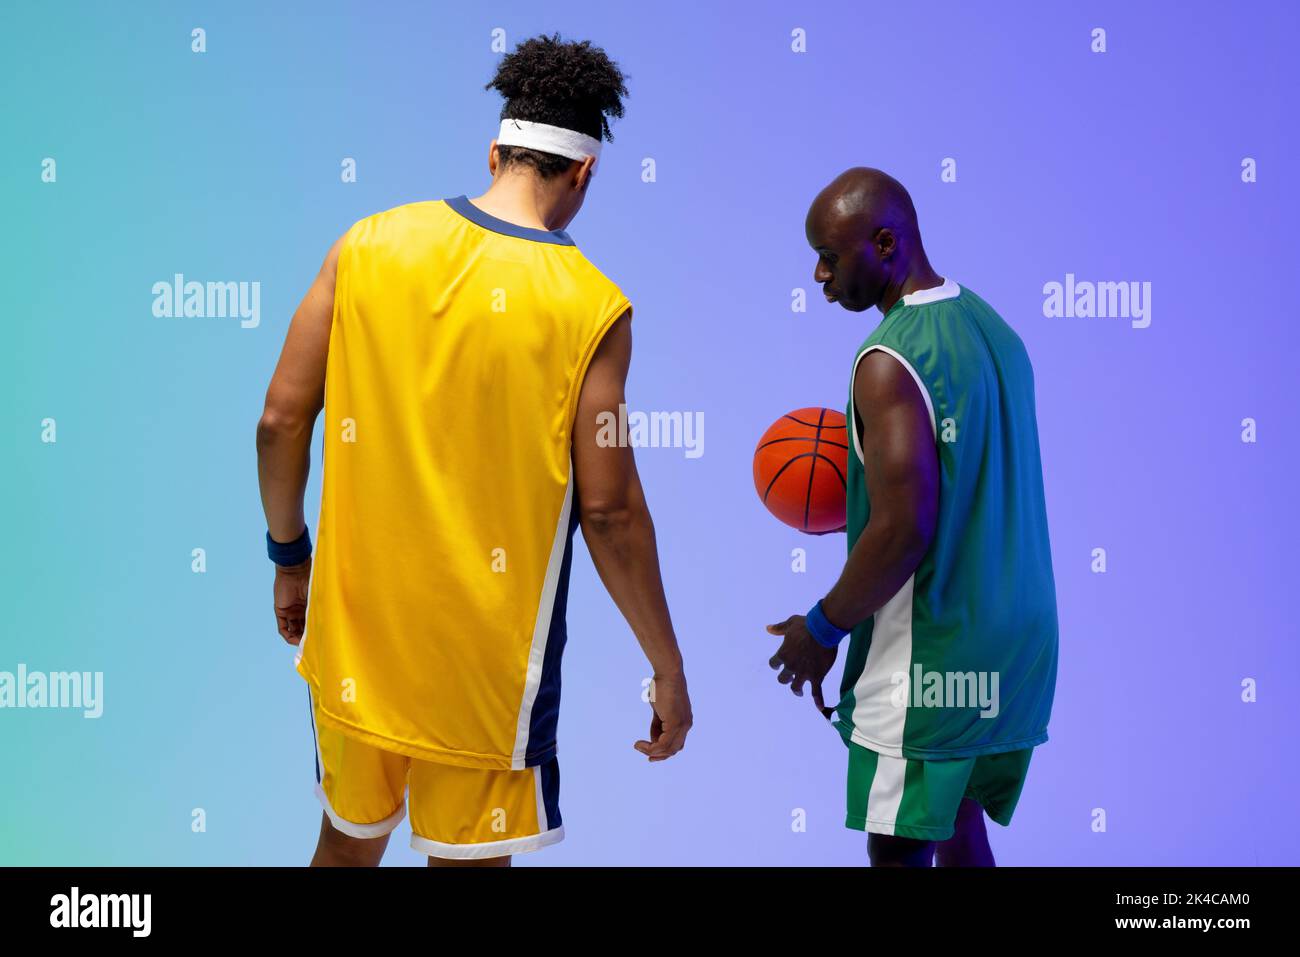 Image of two diverse basketball players with basketball on purple to green background. Sports and competition concept. Stock Photo